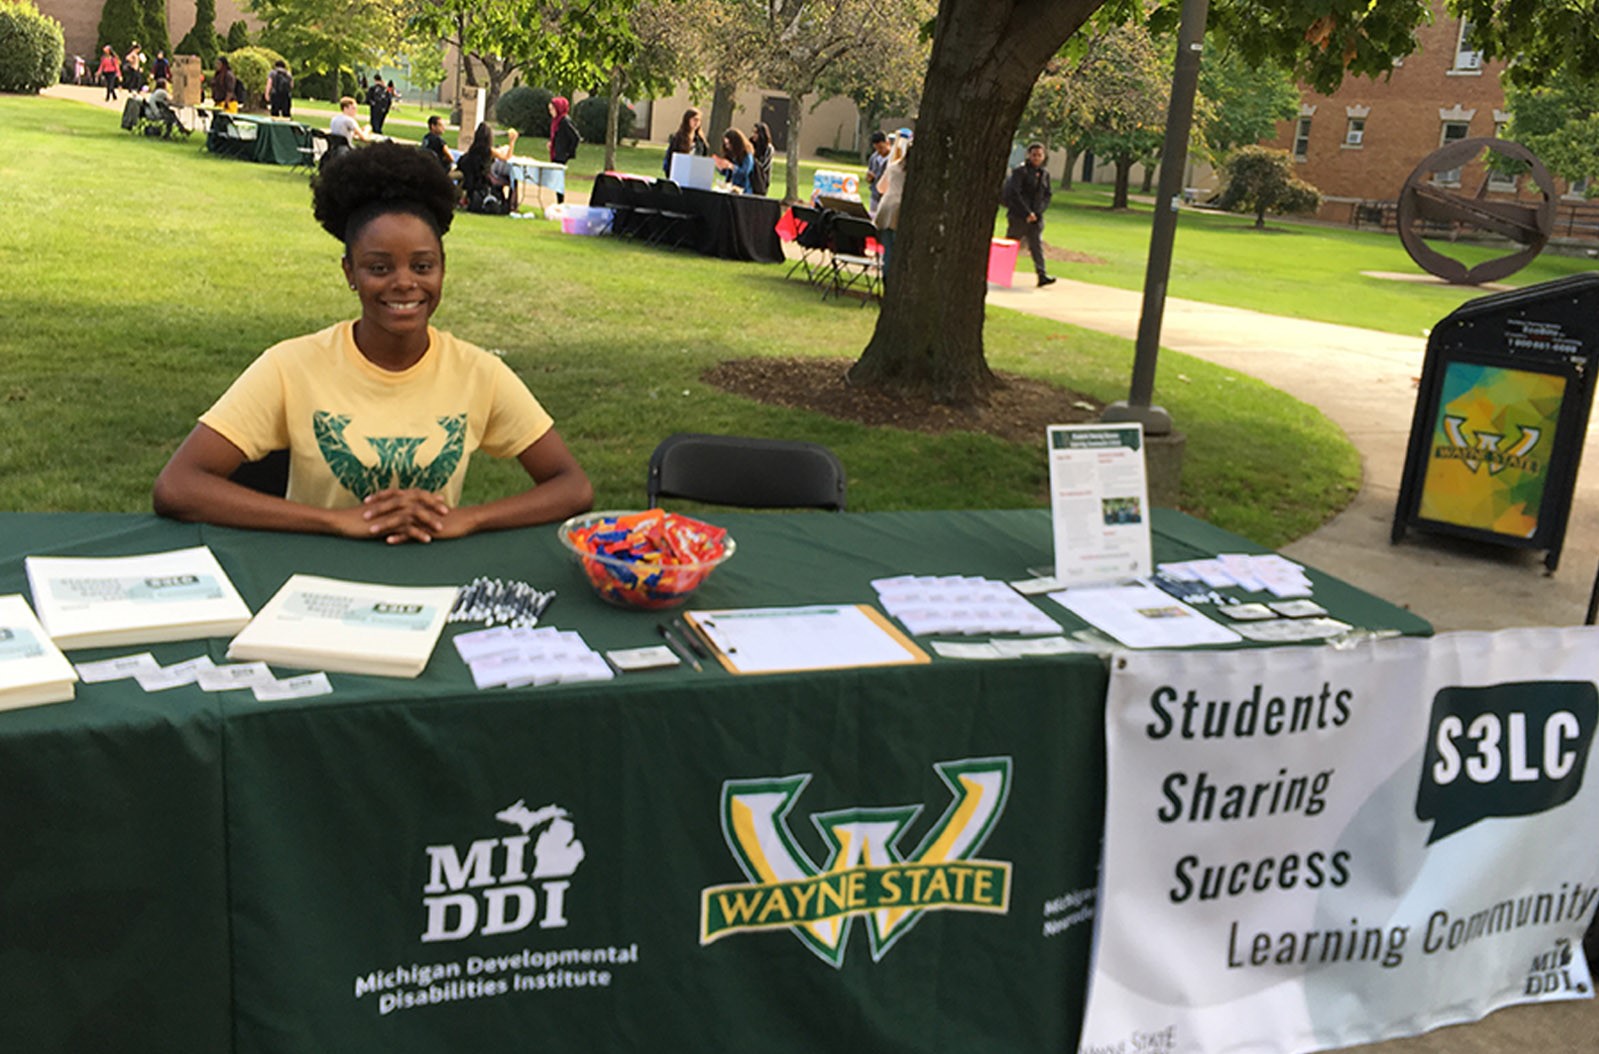 A picture of Nia Anderson sitting at a long table outside on a lawn on the Wayne State campus. Nia has curly black hair that is up and she is wearing a yellow and green Wayne State t-shirt.